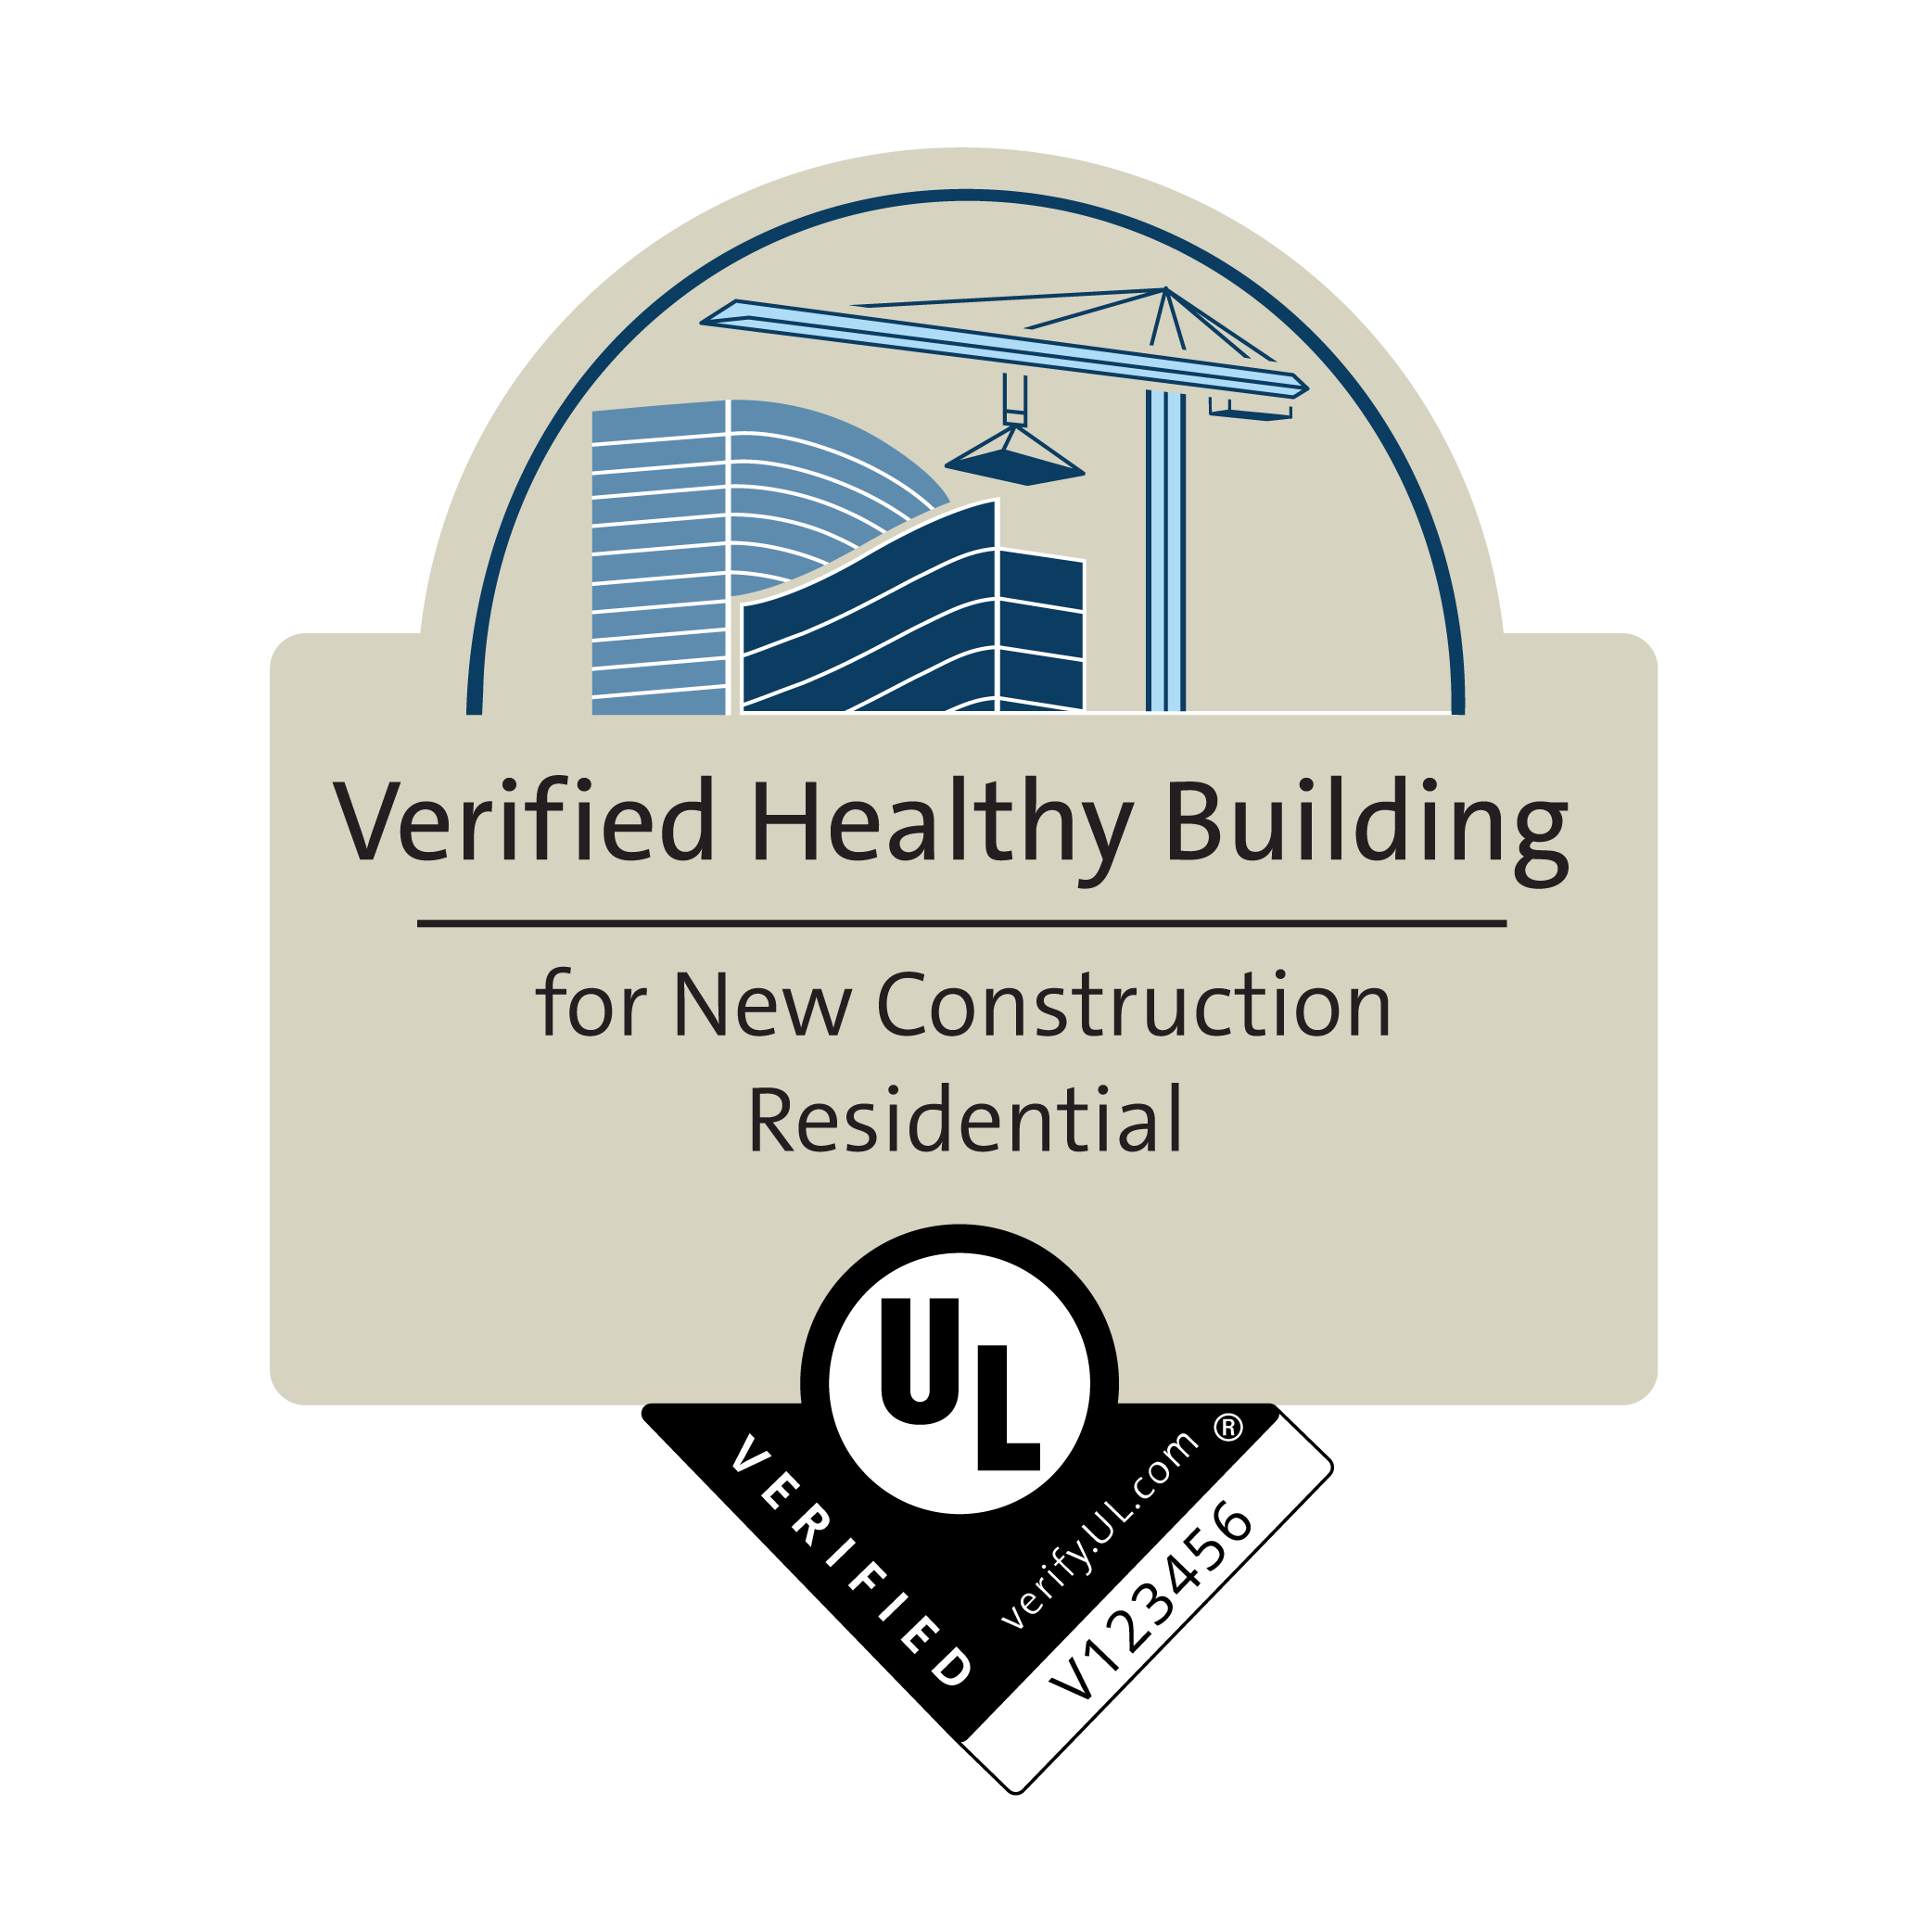 Verification Mark Healthy Building New Construction Residential.